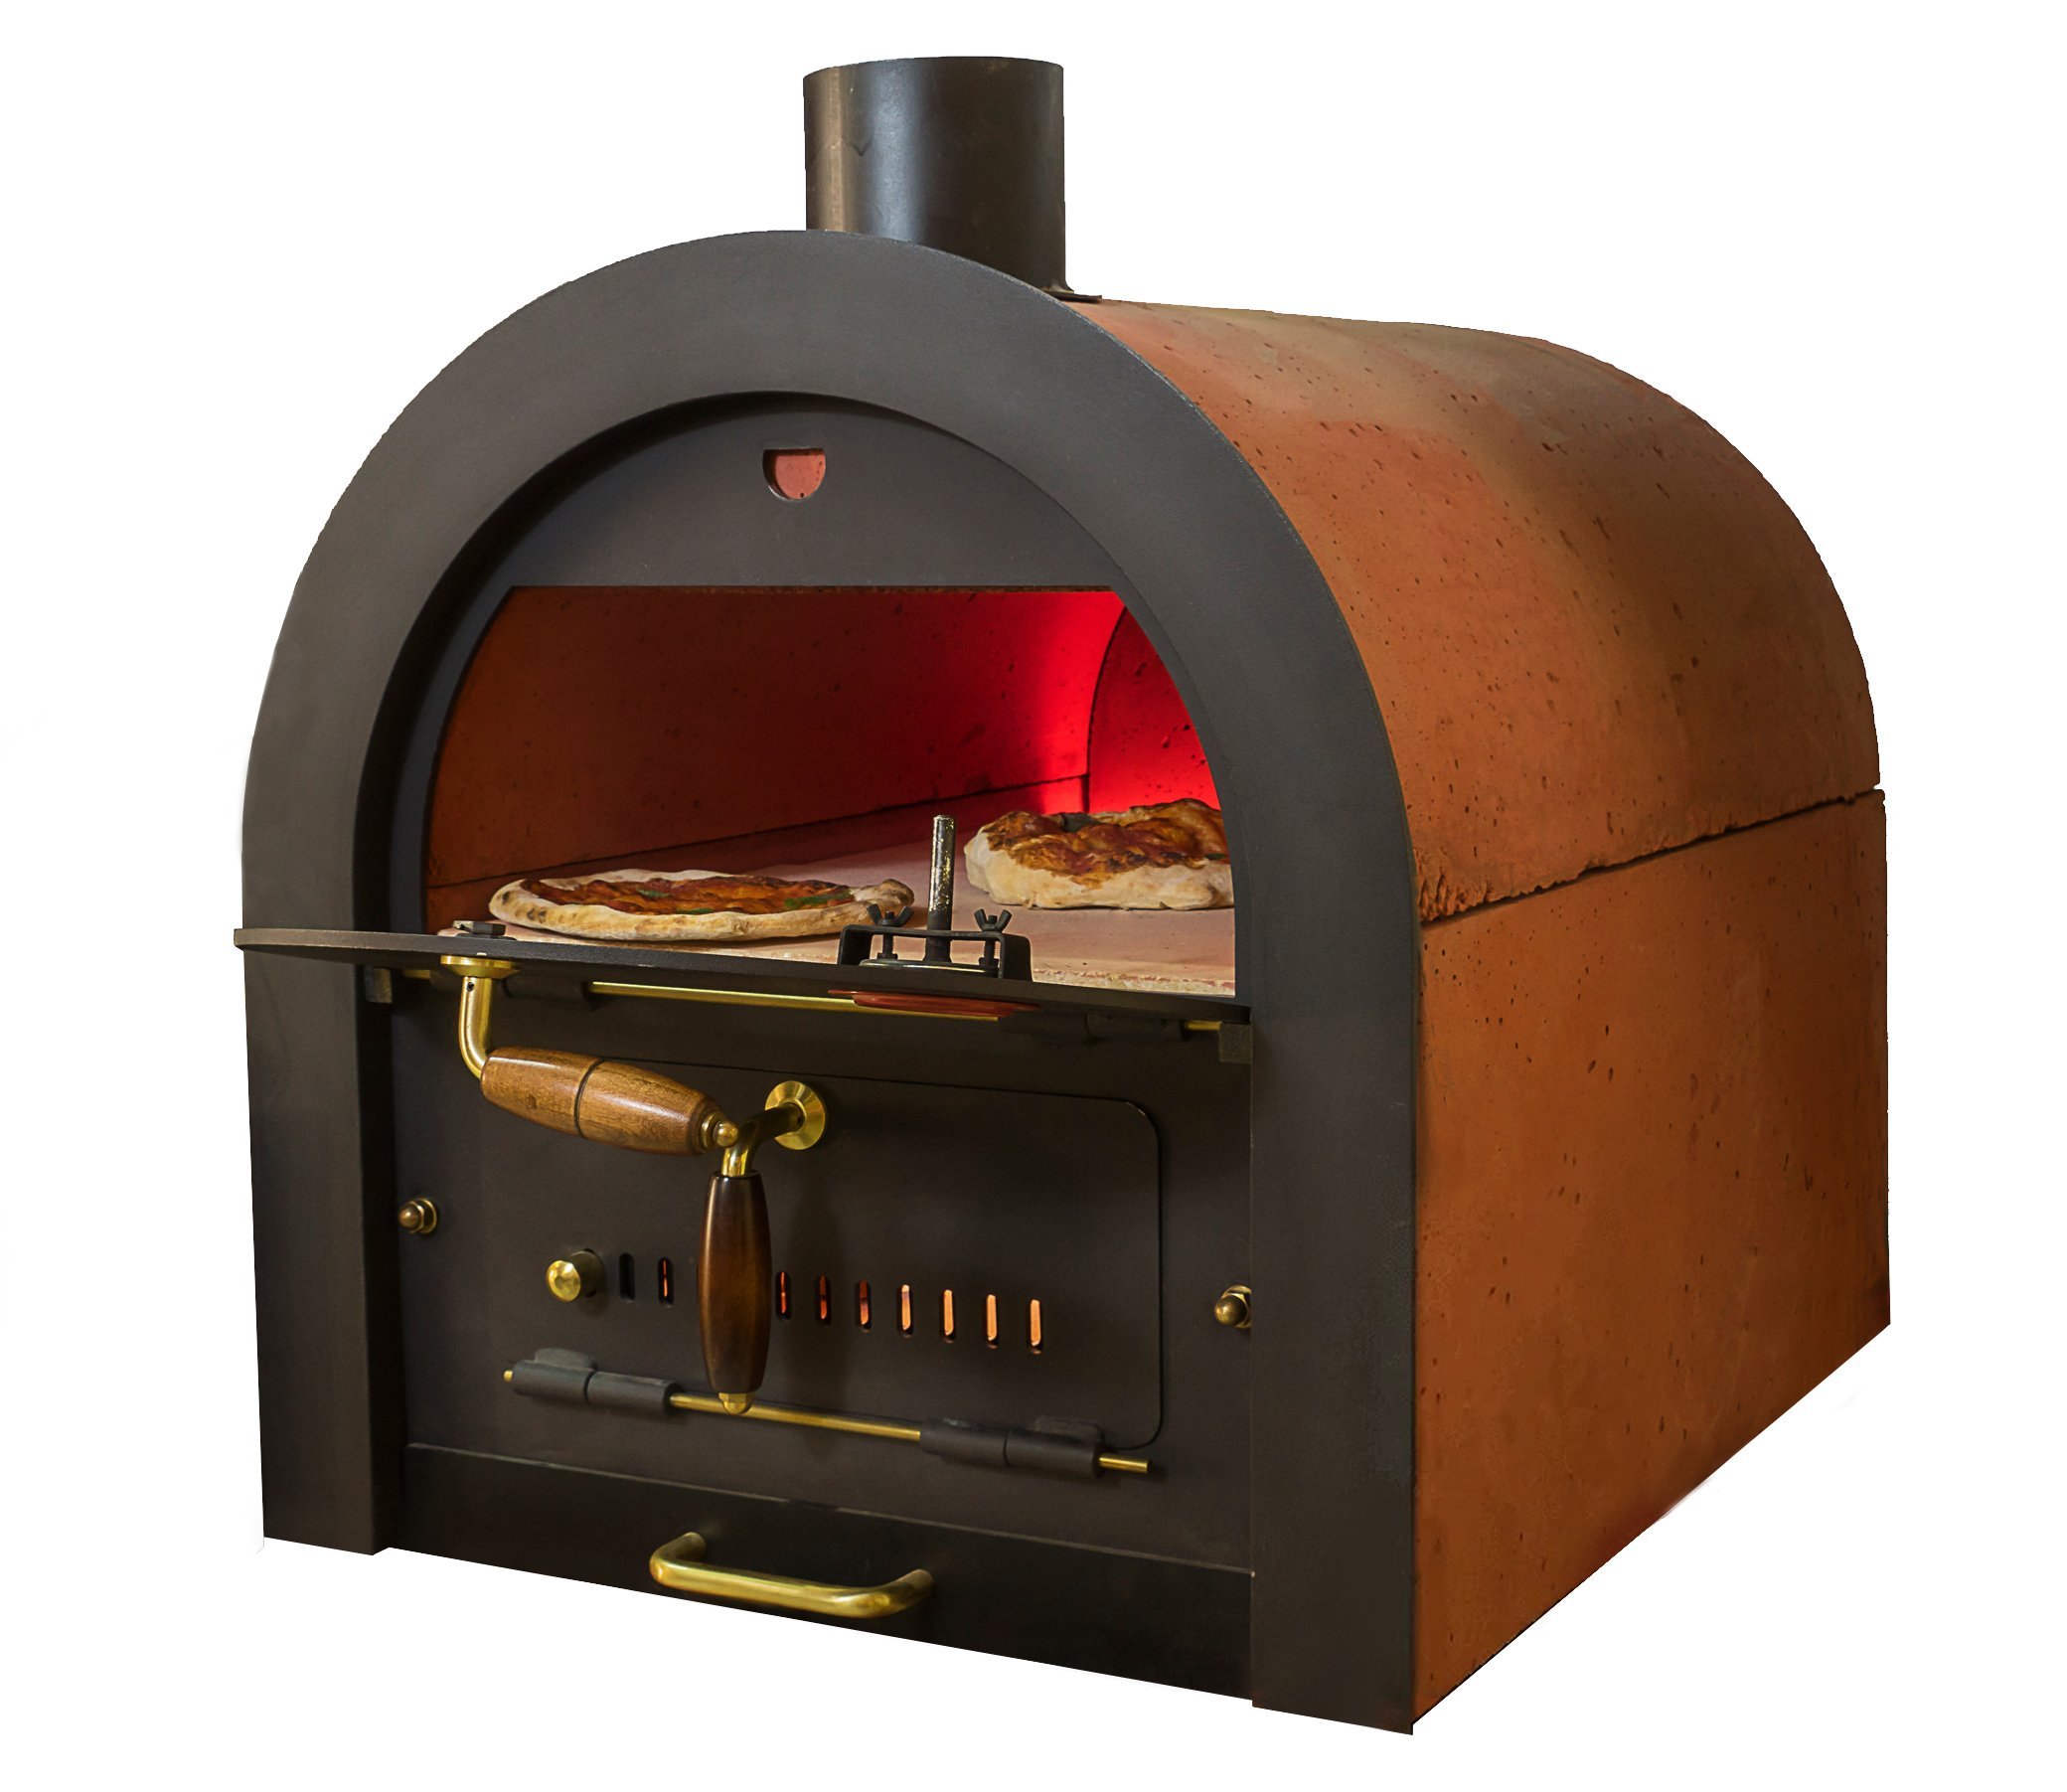 Valoriani pizza & wood oven kit with indirect firing, 40x60cm baking surface.